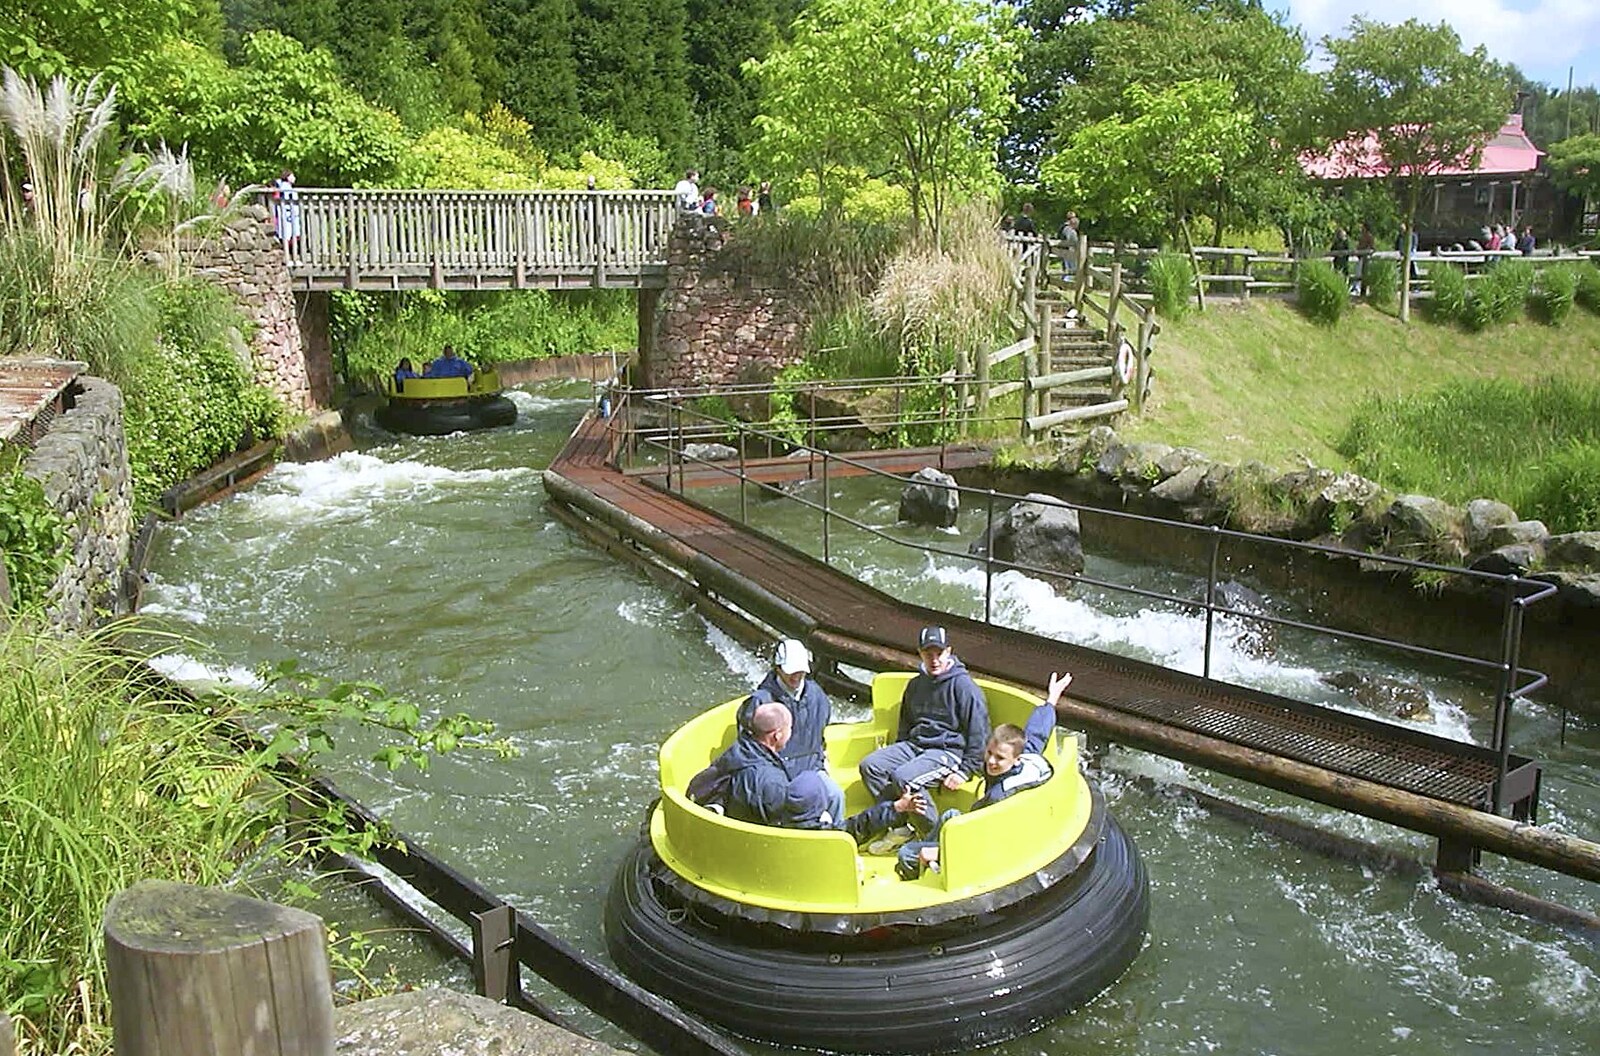 A Trip to Alton Towers, Staffordshire - 19th June 2004: People on the log flume